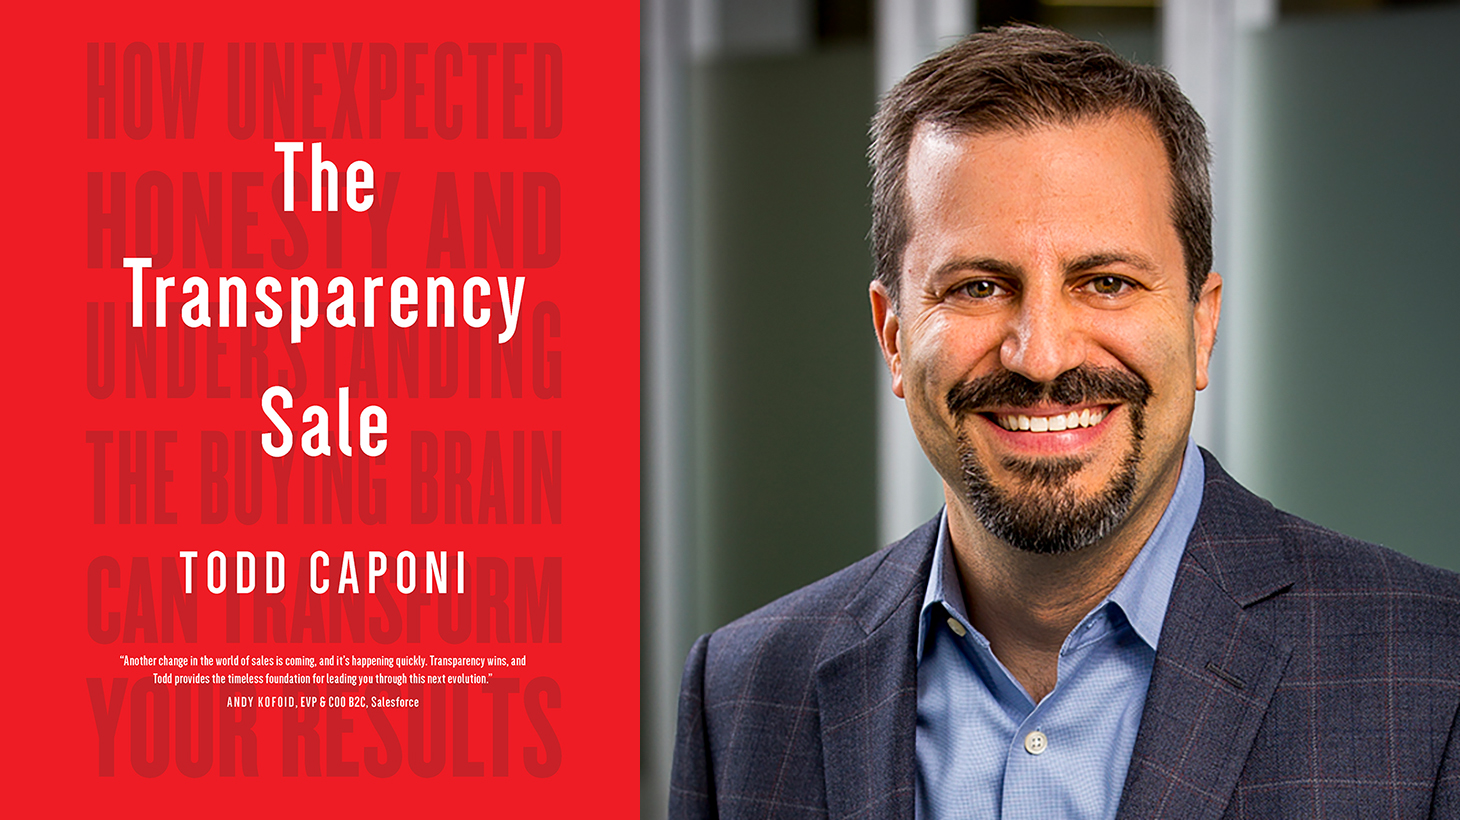 The Transparency Sale and Todd Caponi